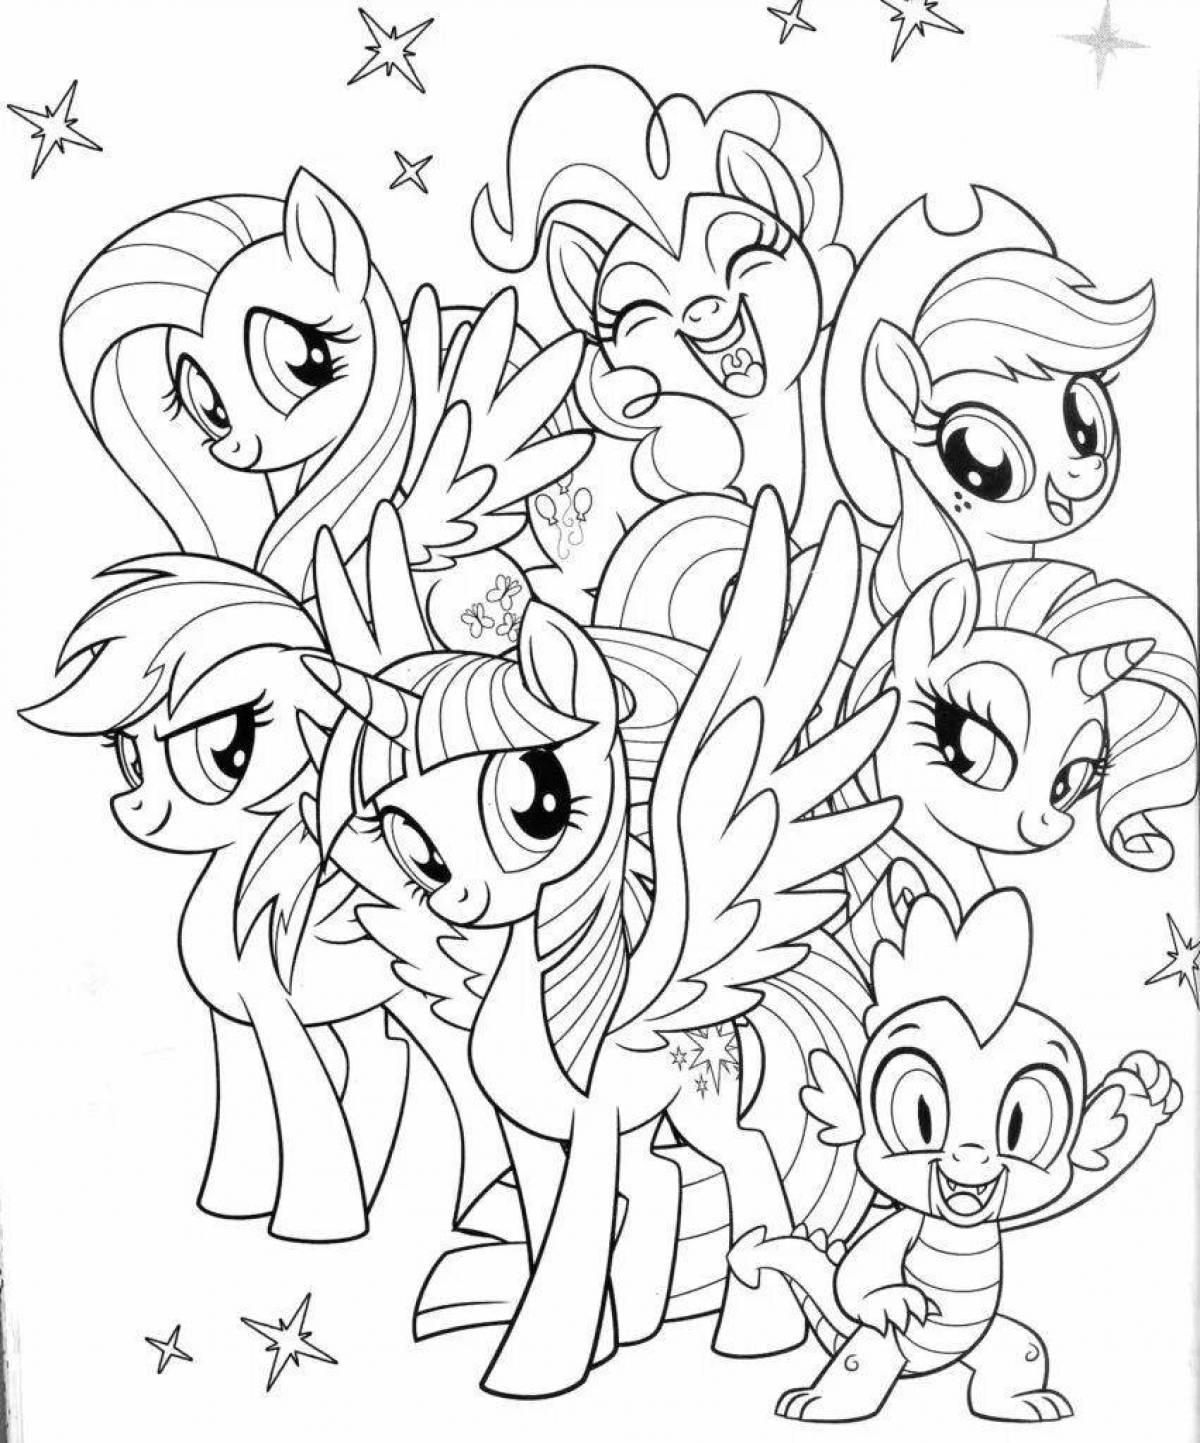 Bright coloring all the ponies together